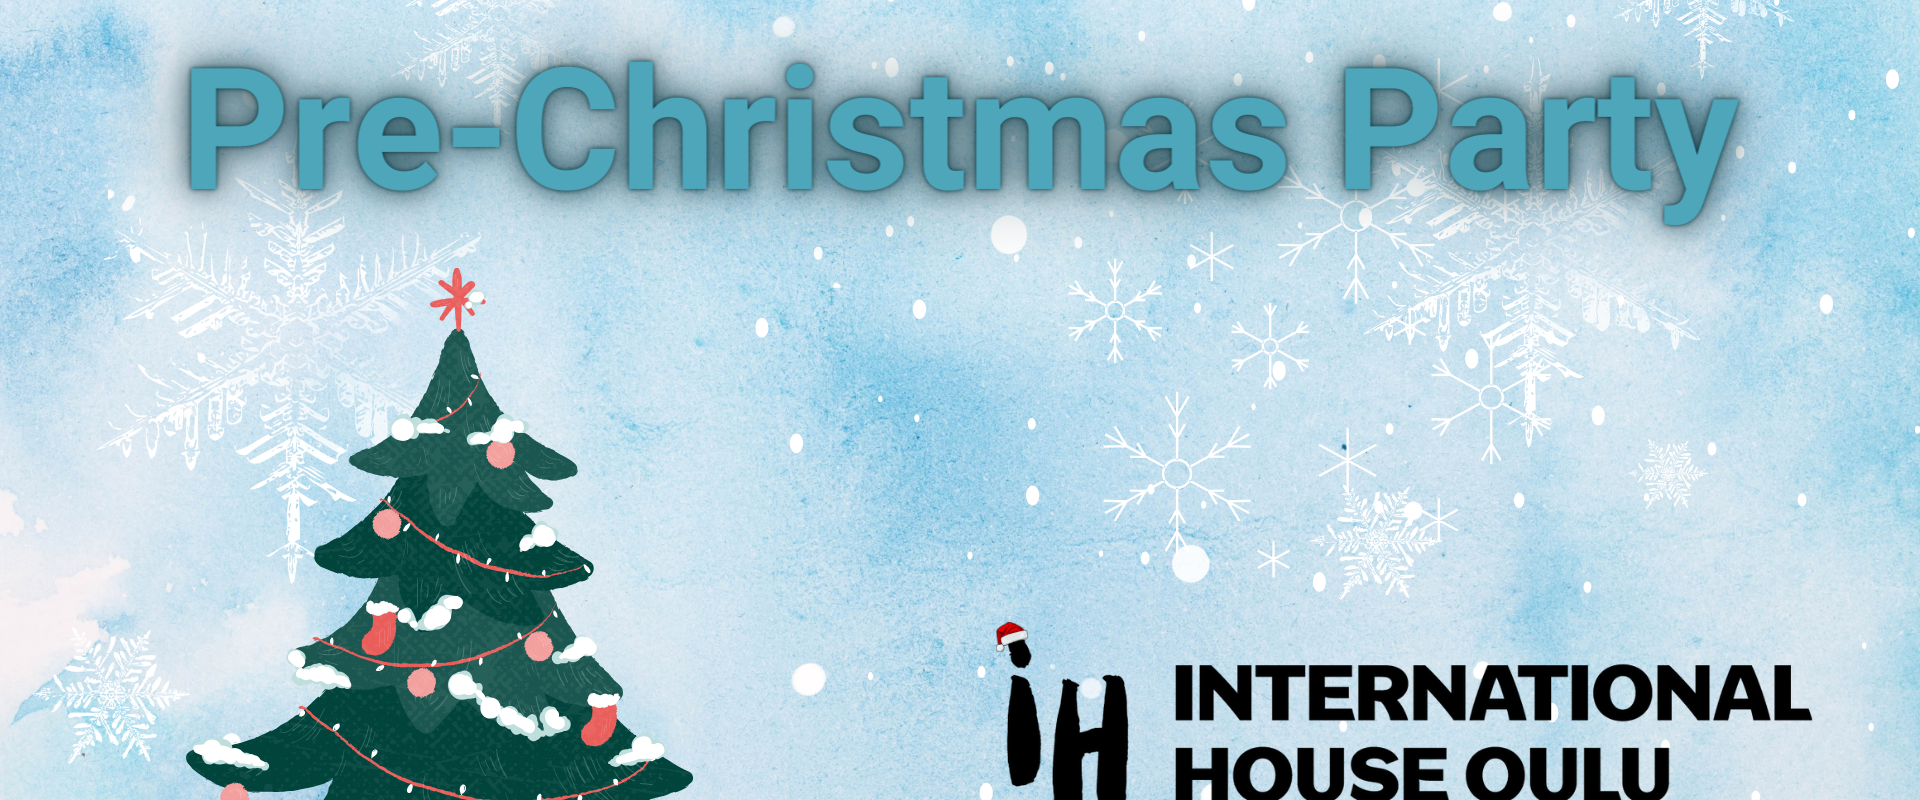 The enchanting snow has arrived, and the holiday buzz is in full swing! Join us for the International House Oulu's magical Pre-Christmas Party – an evening bursting with joy and fun!